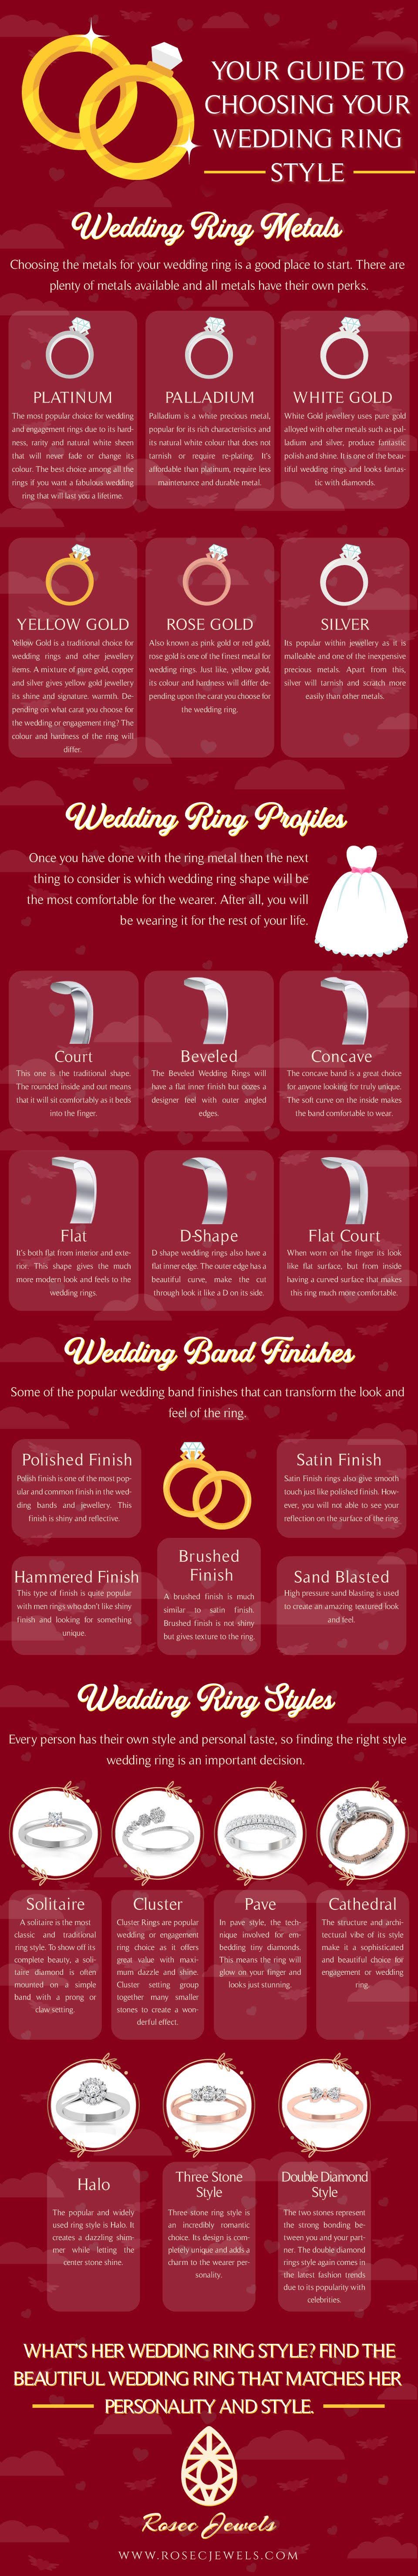 Your Guide to Choosing Your Wedding Ring Style #infographic